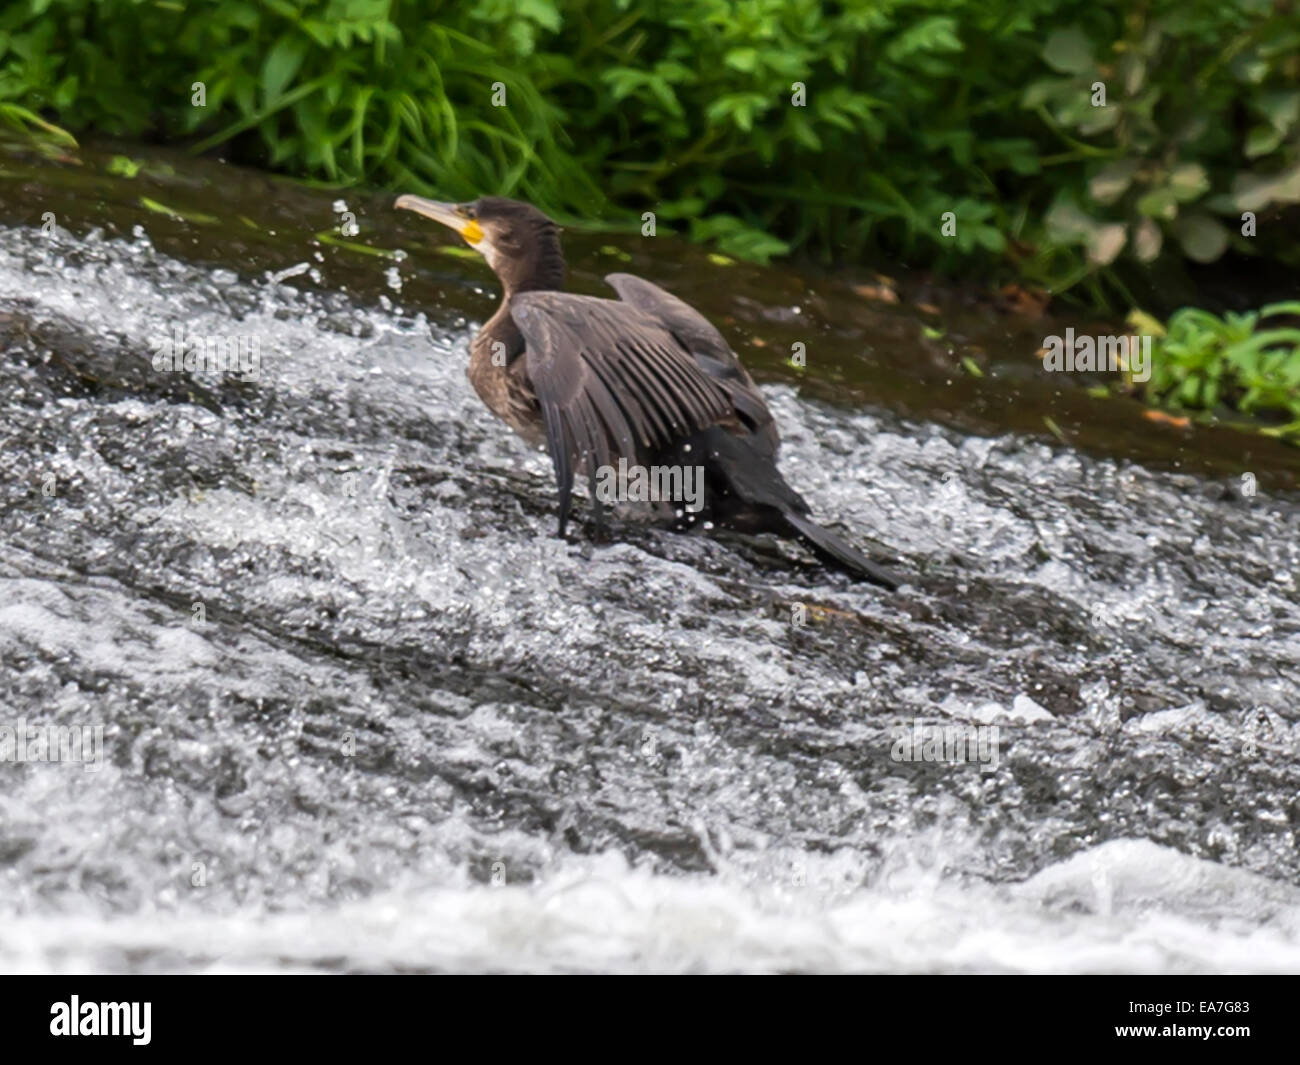 Wild Cormorant [Phalacrocoracidae] traverses the torrential weir waters near the river bank. Stock Photo